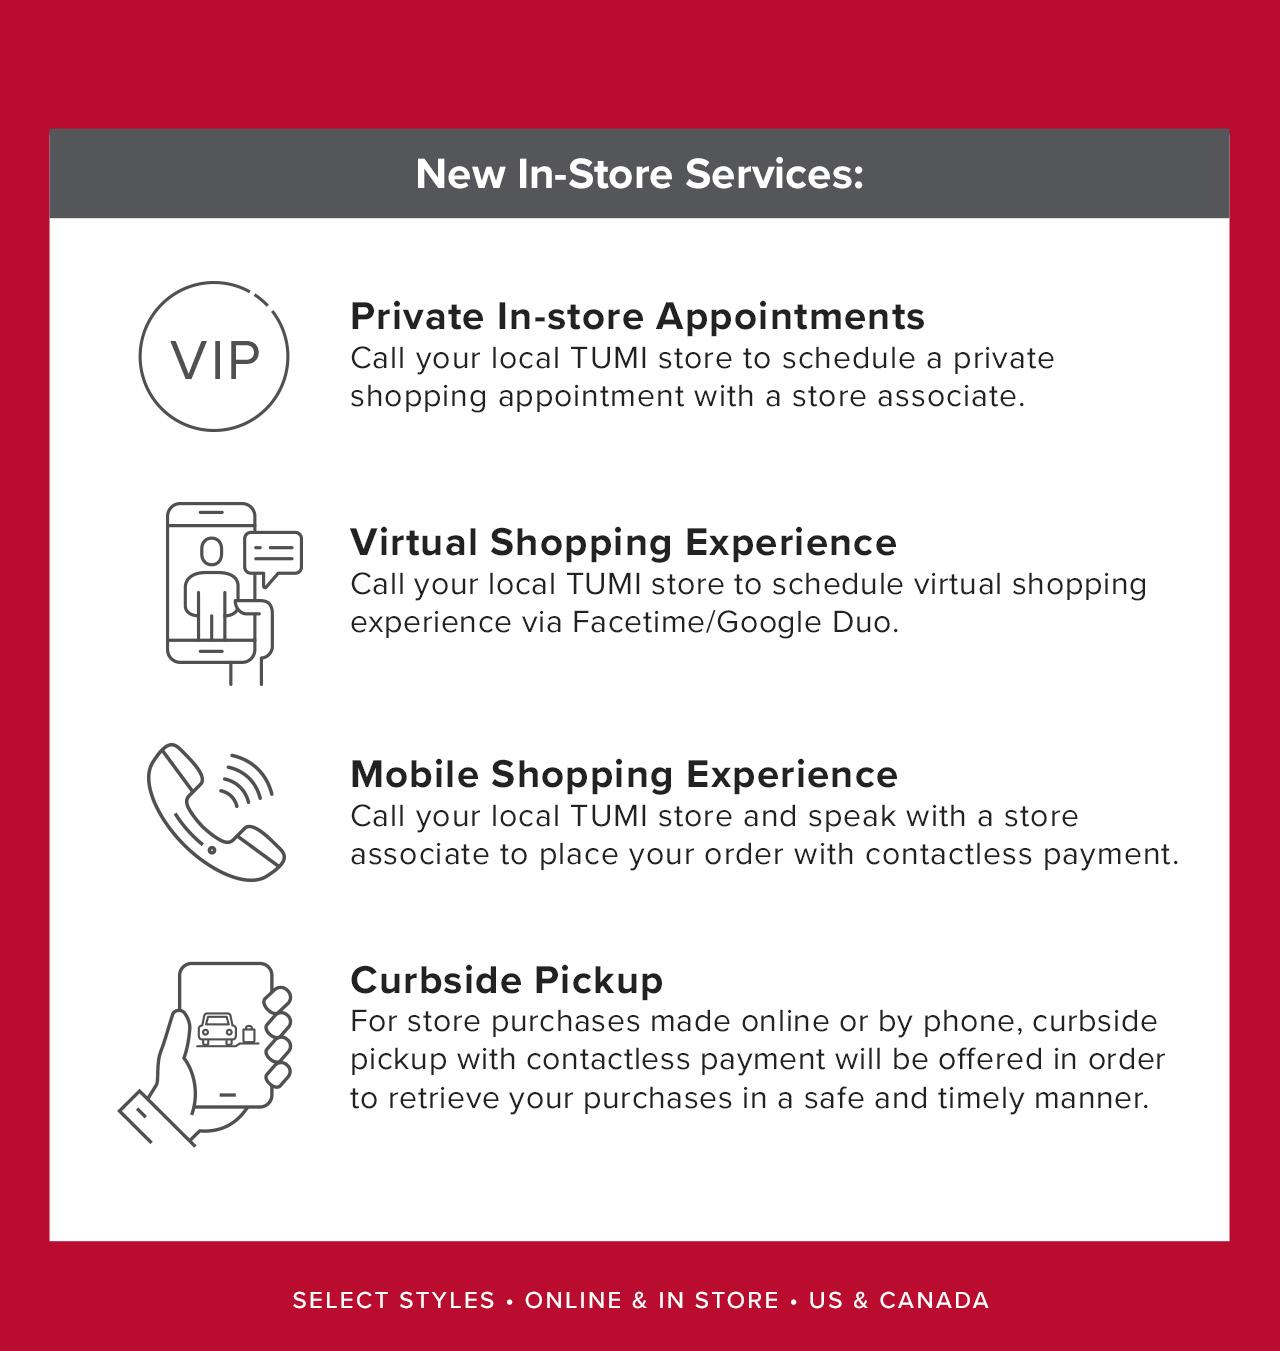 New In-Store Services